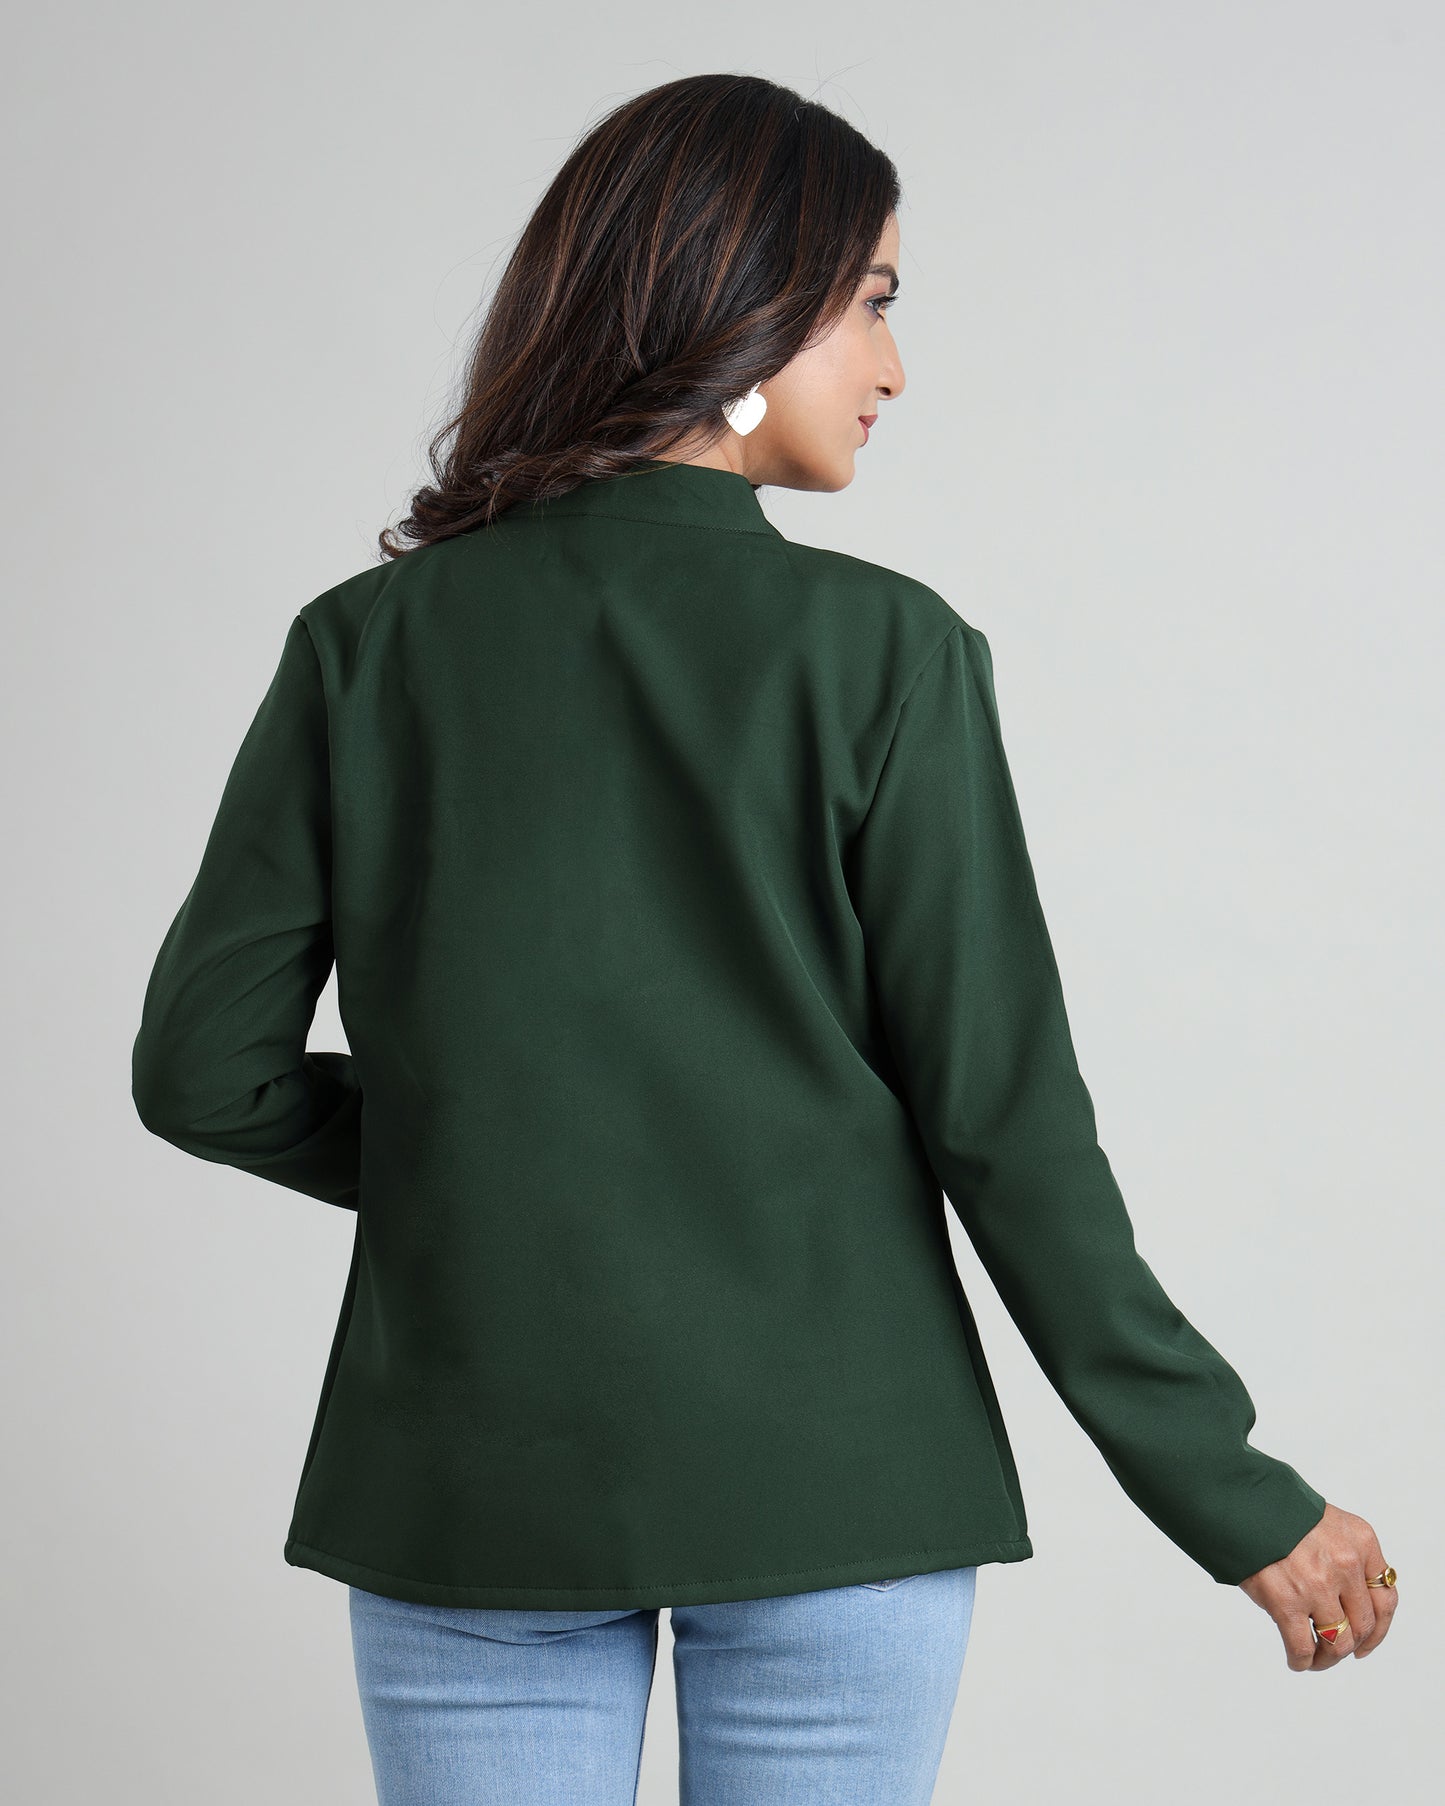 Elevate Your Everyday: The Women's Plain Jacket